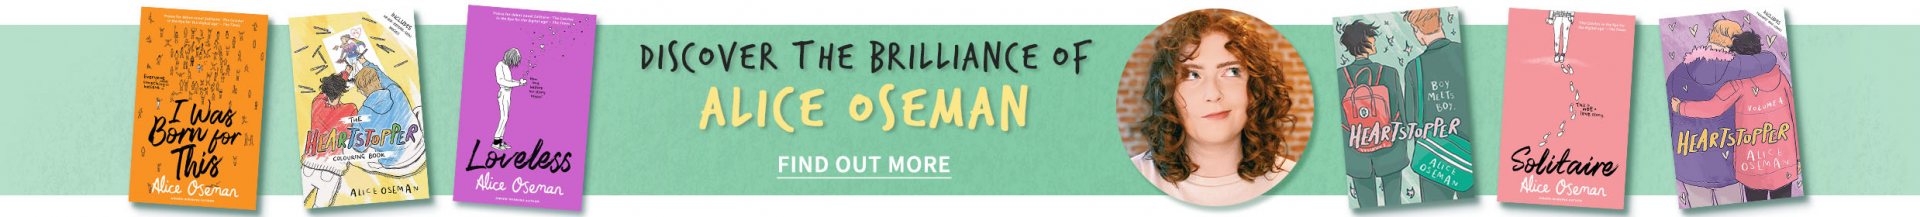 Discover the Brilliance of Alice Oseman | Find out More